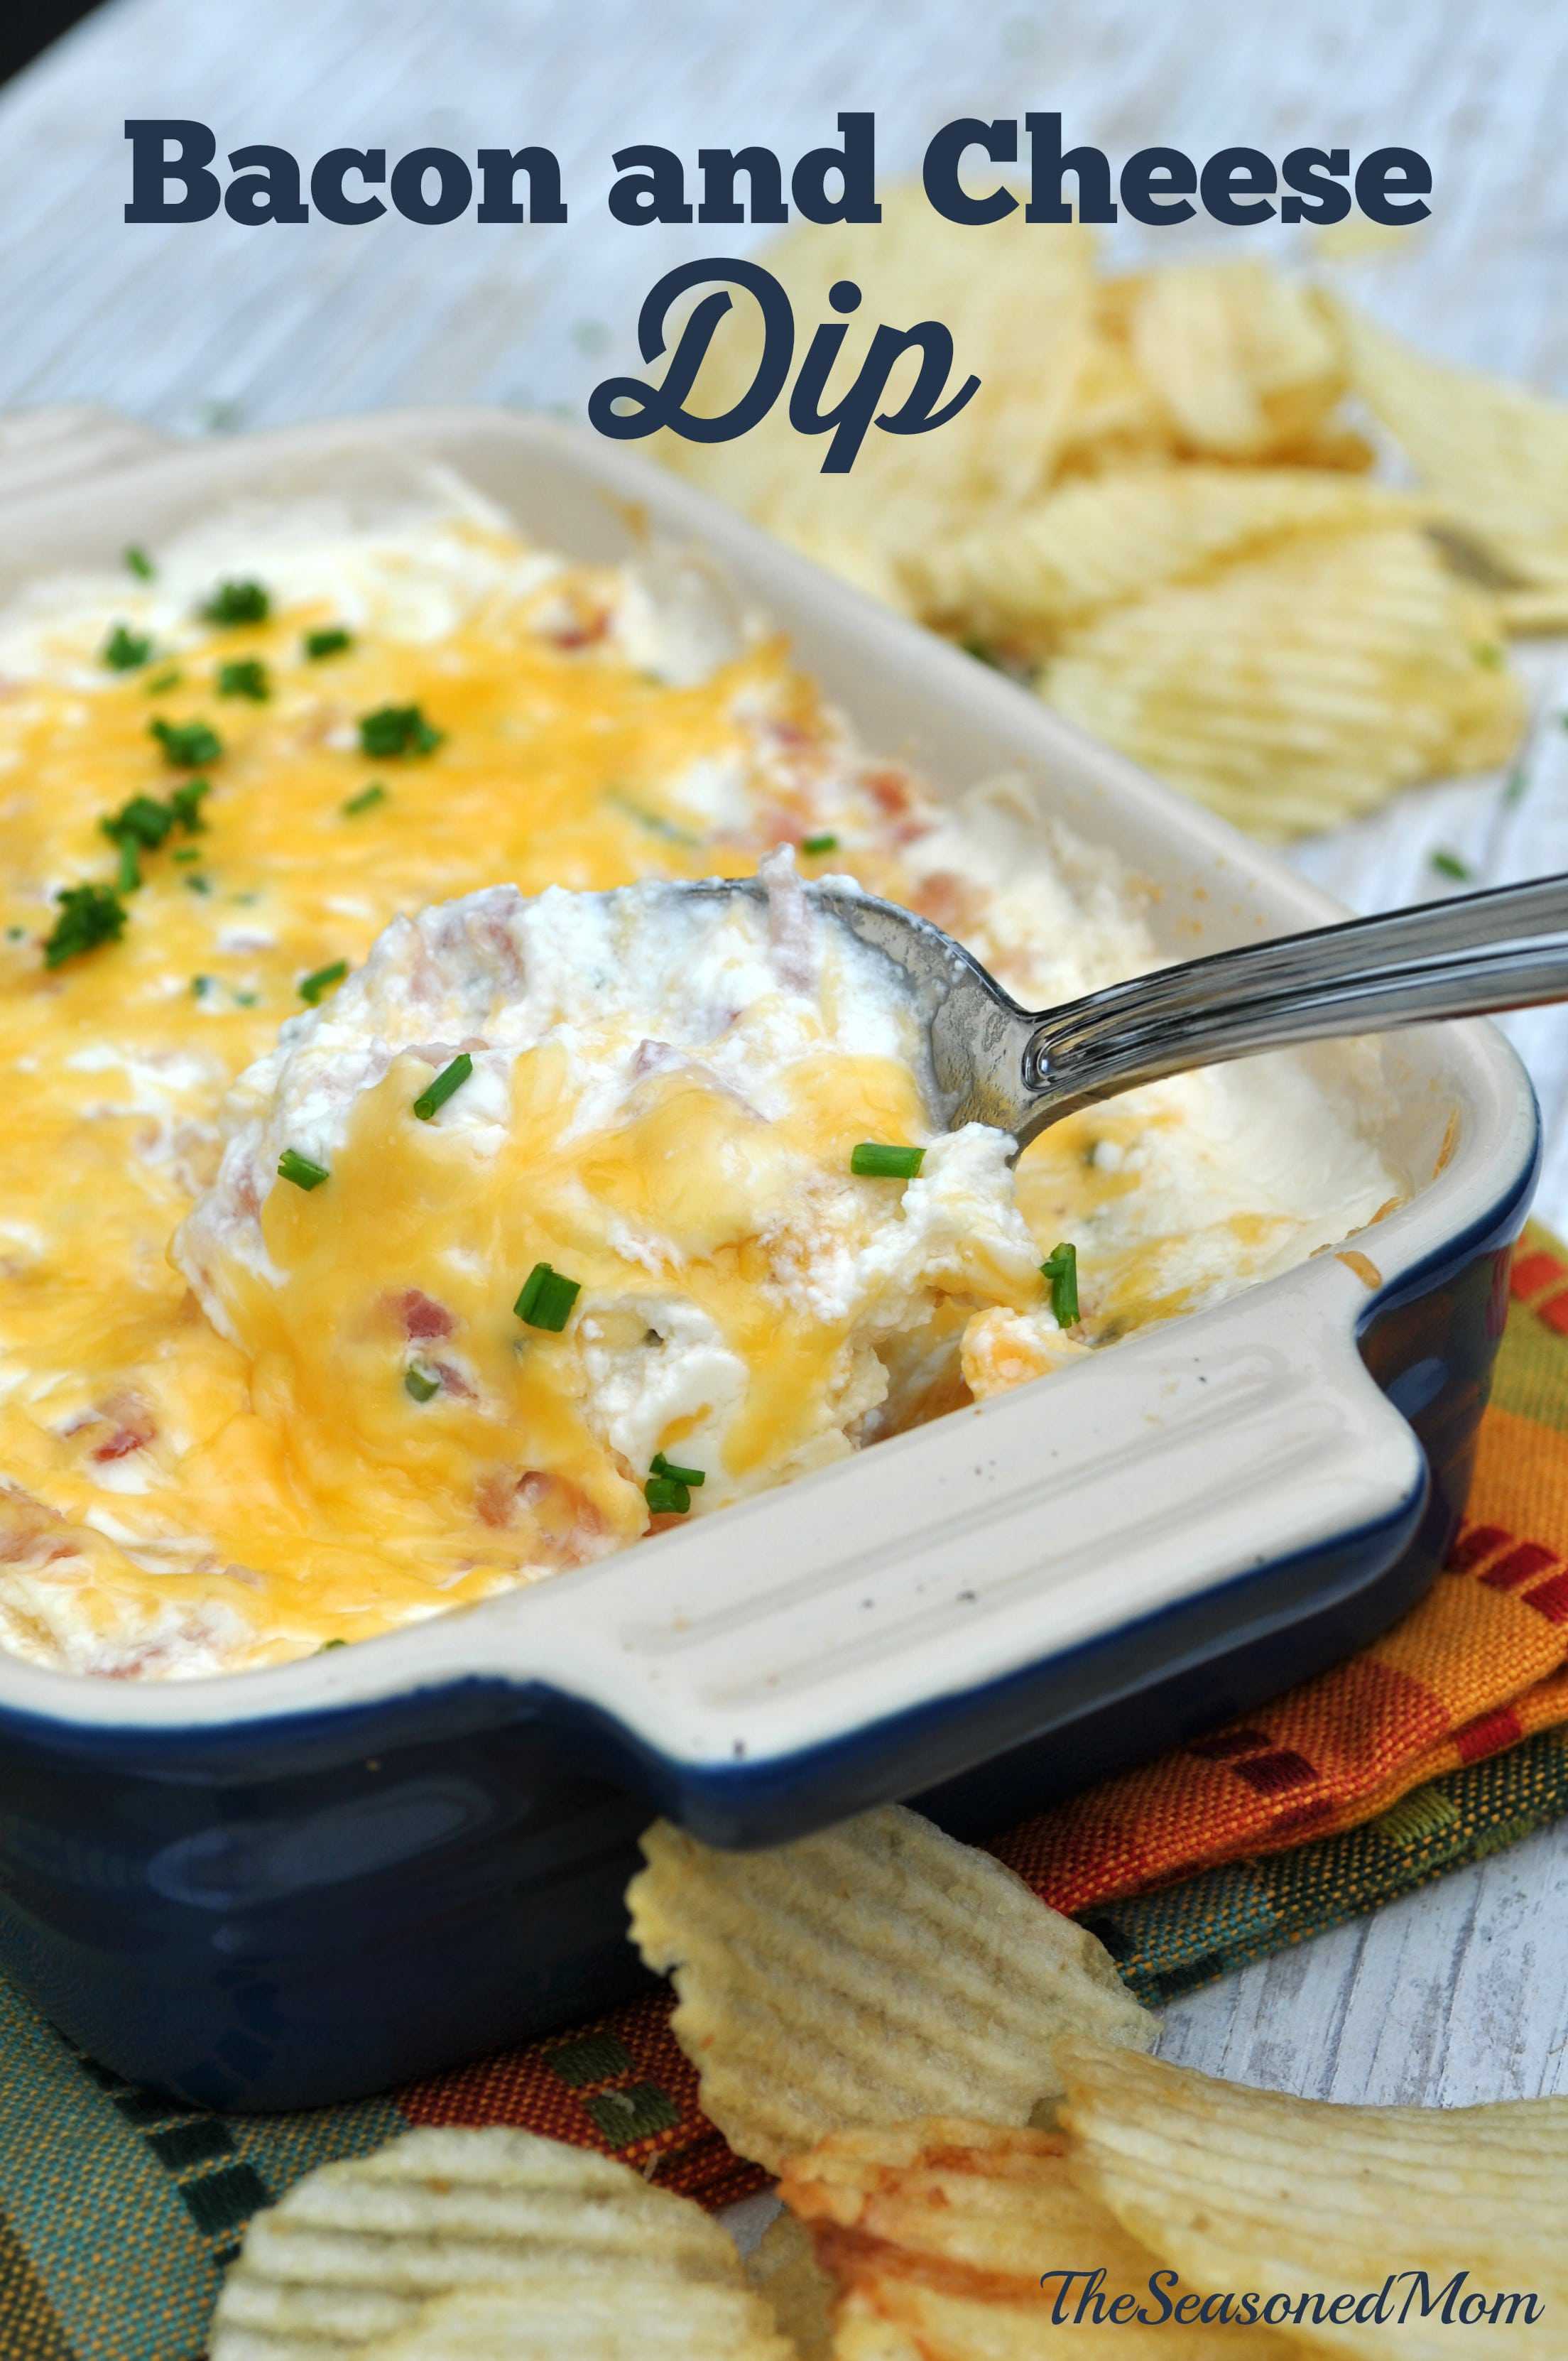 Bacon and Cheese Dip